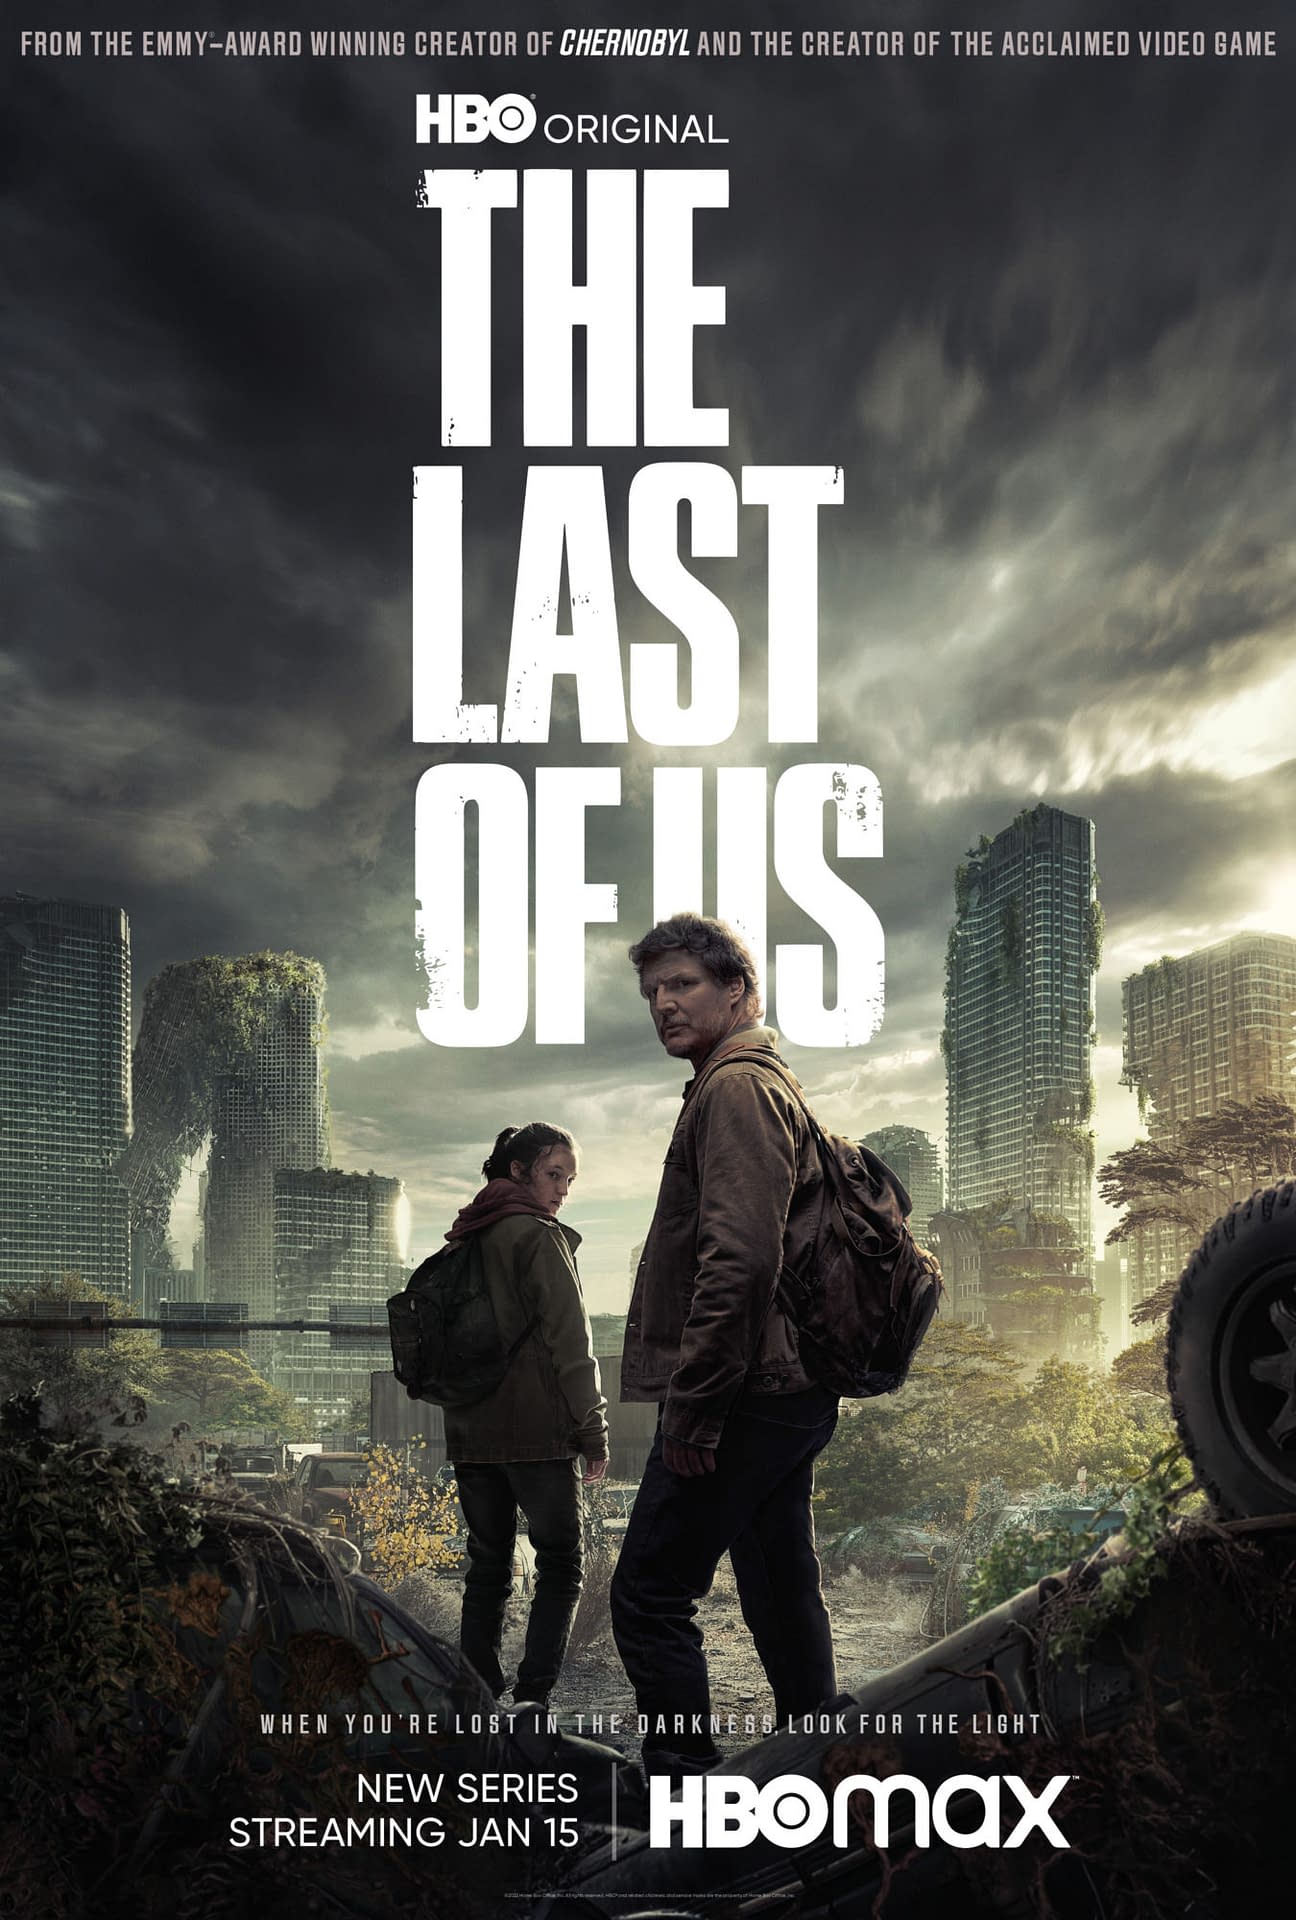 THE LAST OF US - HBO Series TEASER TRAILER (2022) Feat. Pedro